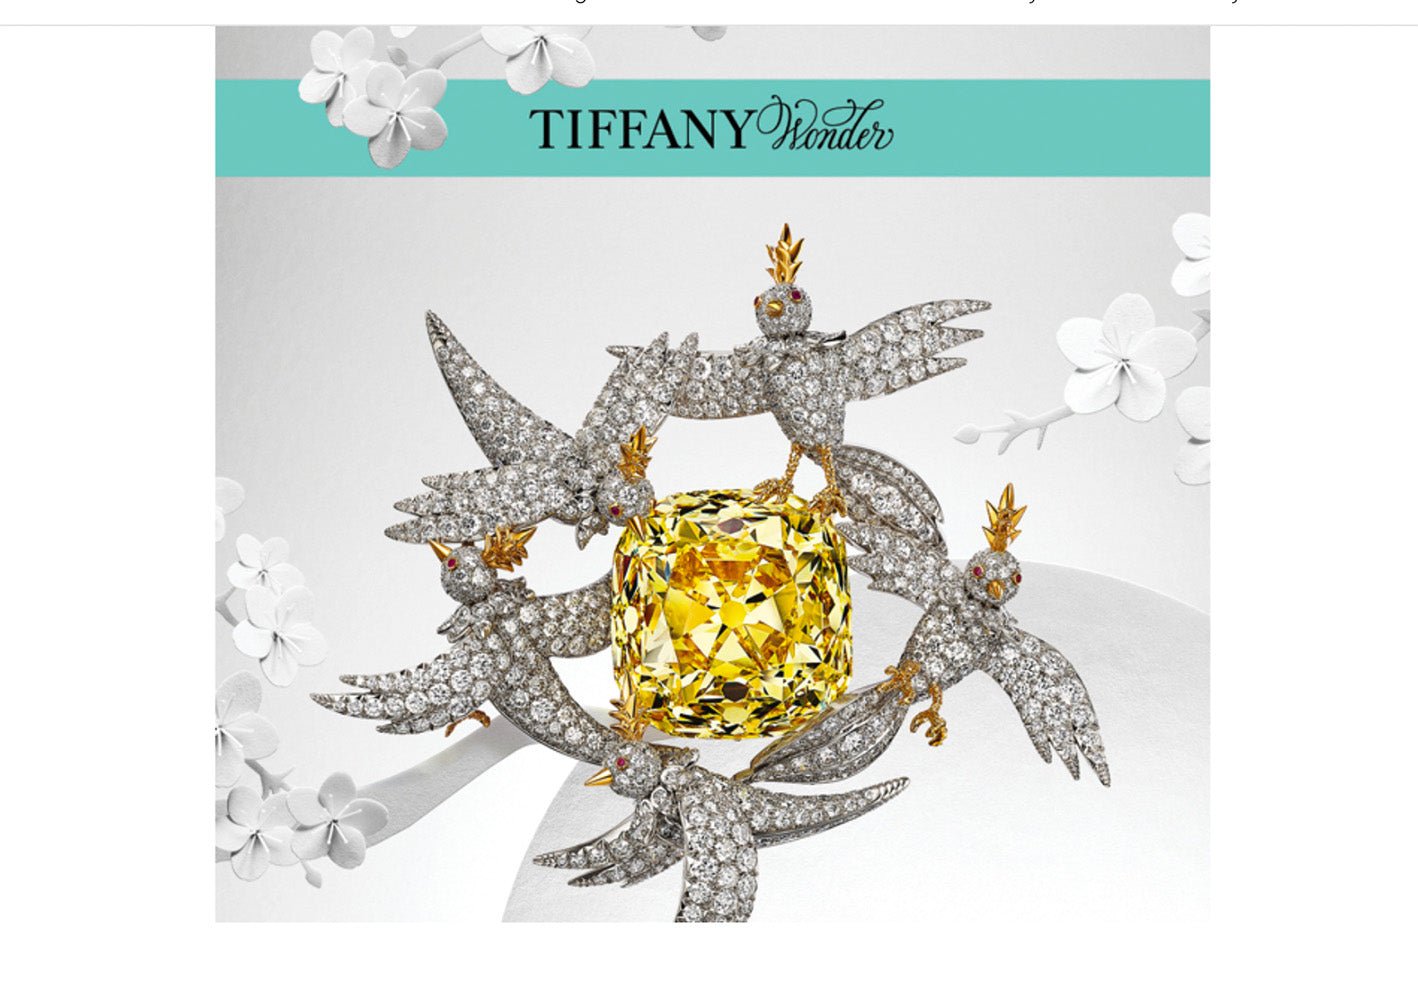 Tiffany & Co. Unveils Tiffany Wonder Exhibition in Tokyo, Commemorating 187 Years of Artistry and Legacy in Diamonds - DSF Antique Jewelry